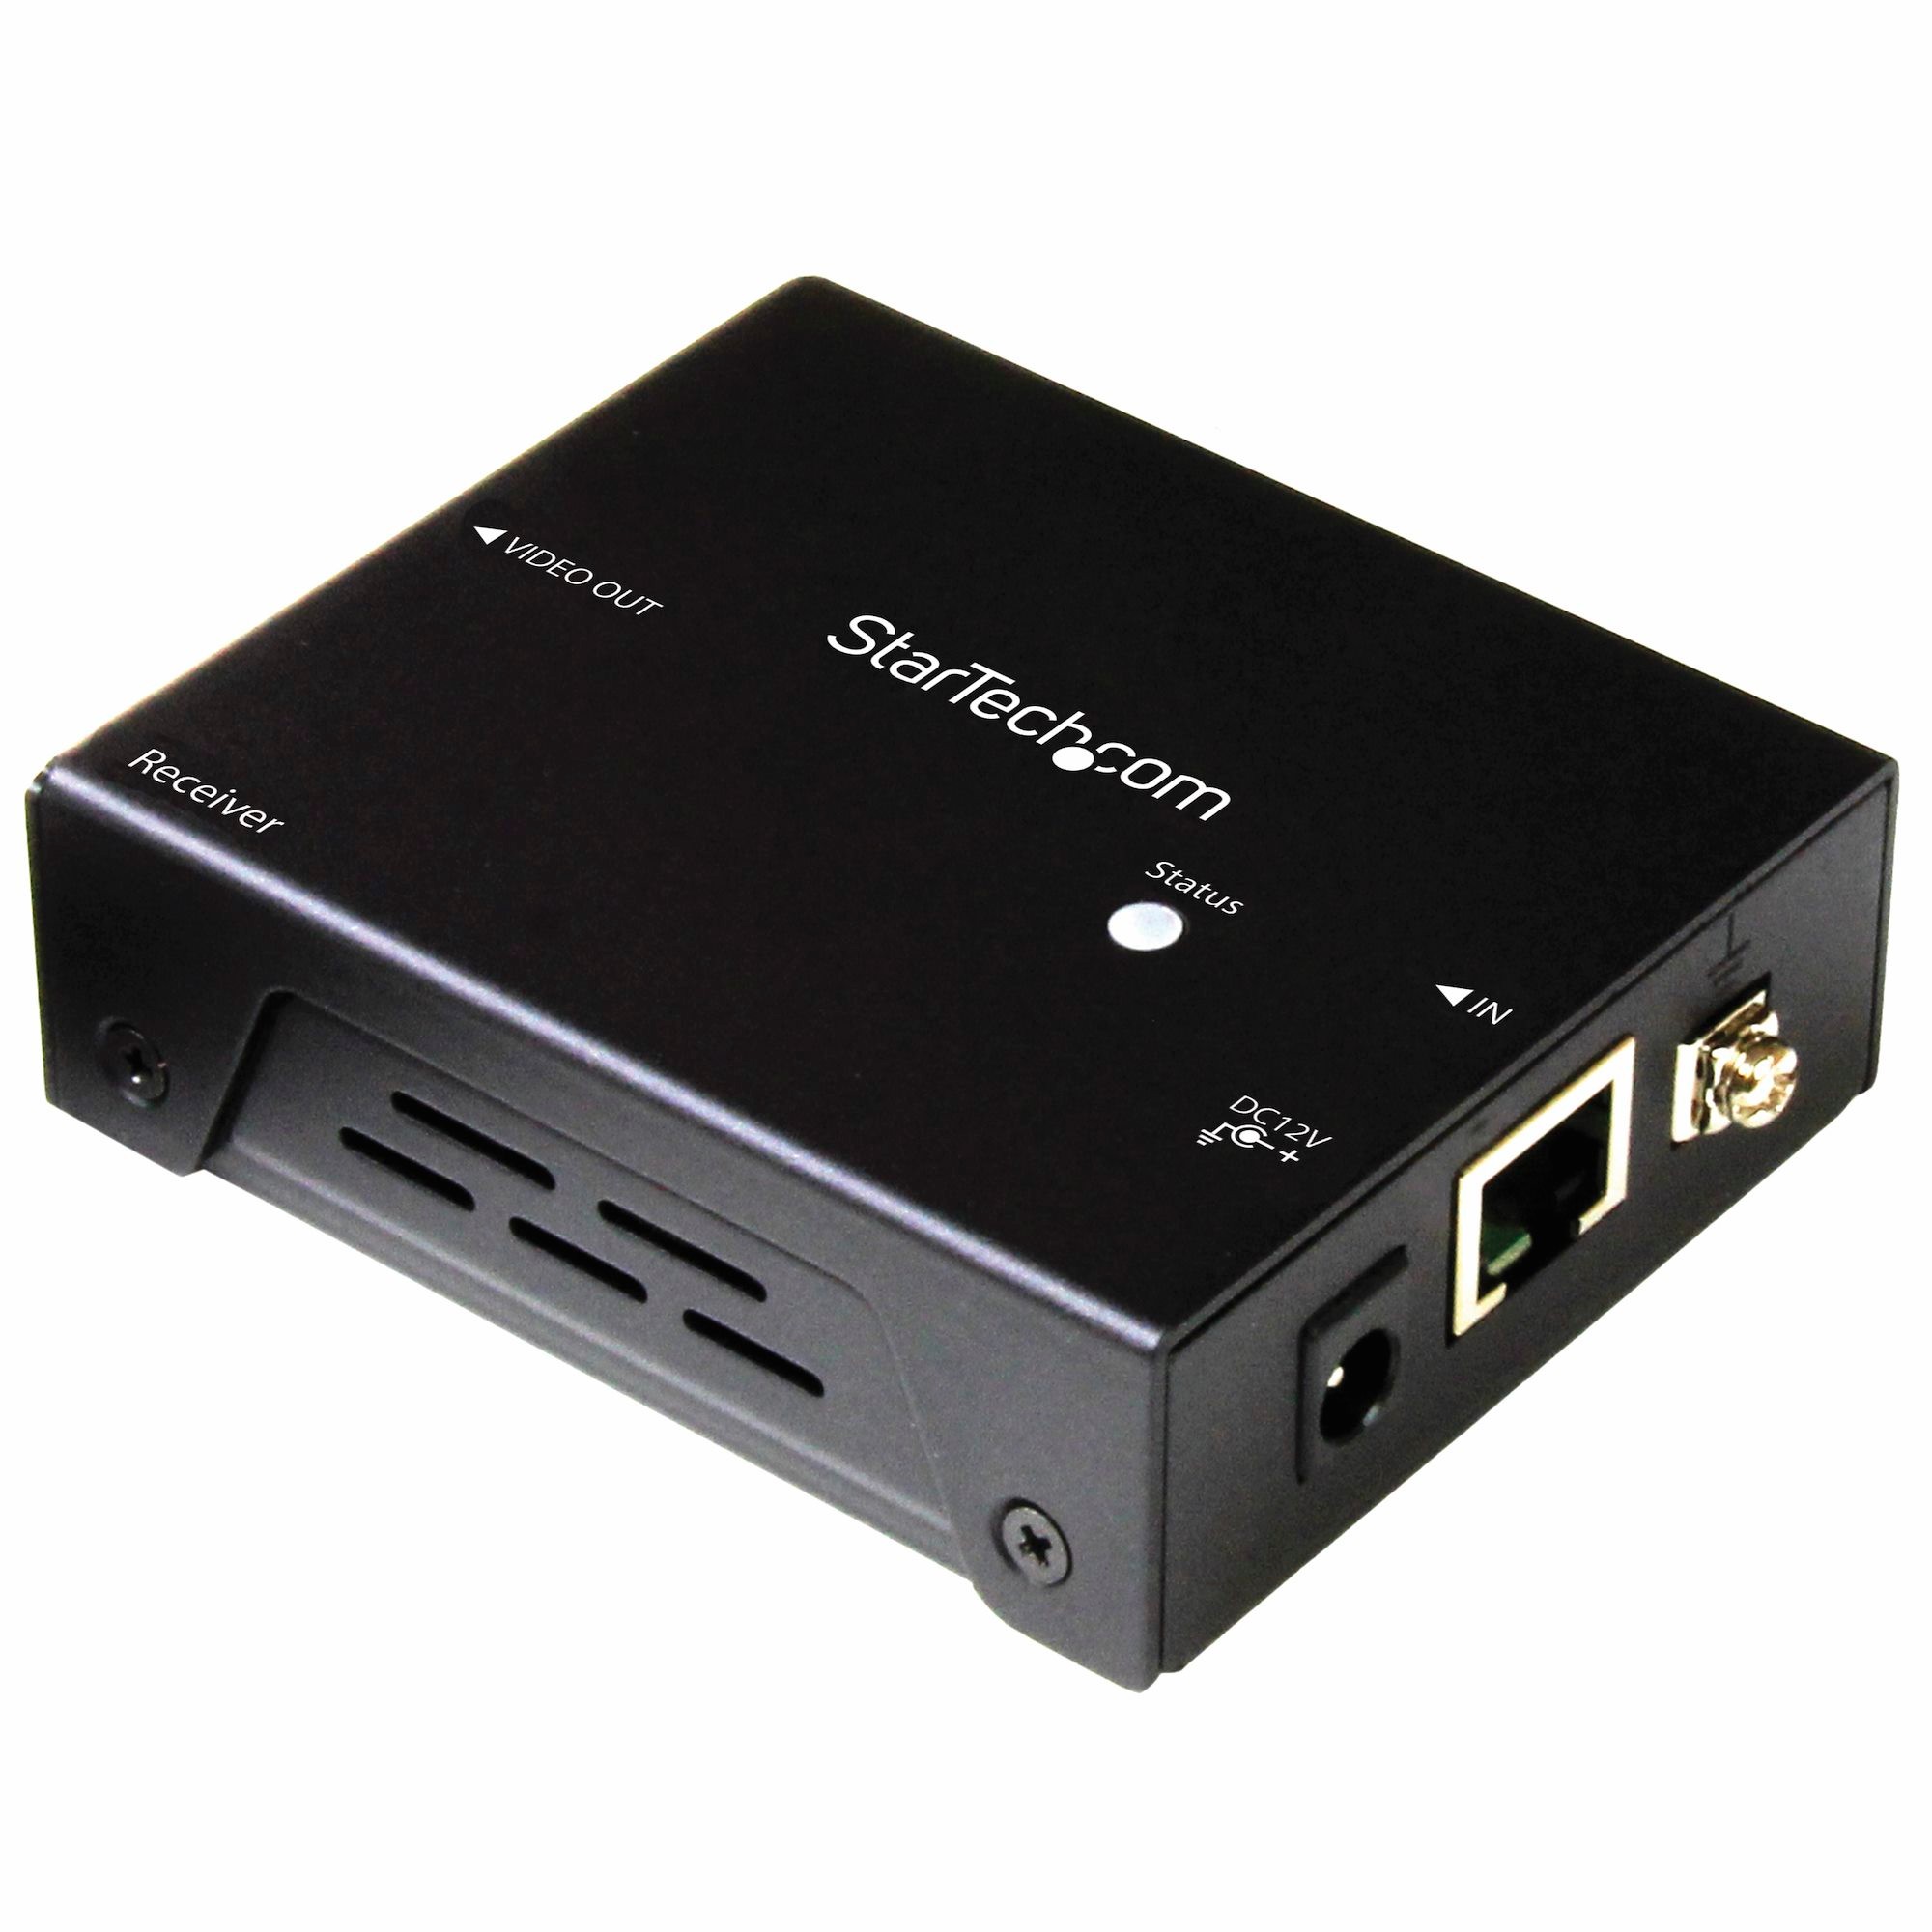 4K HDMI Extender with IR control up to 230ft